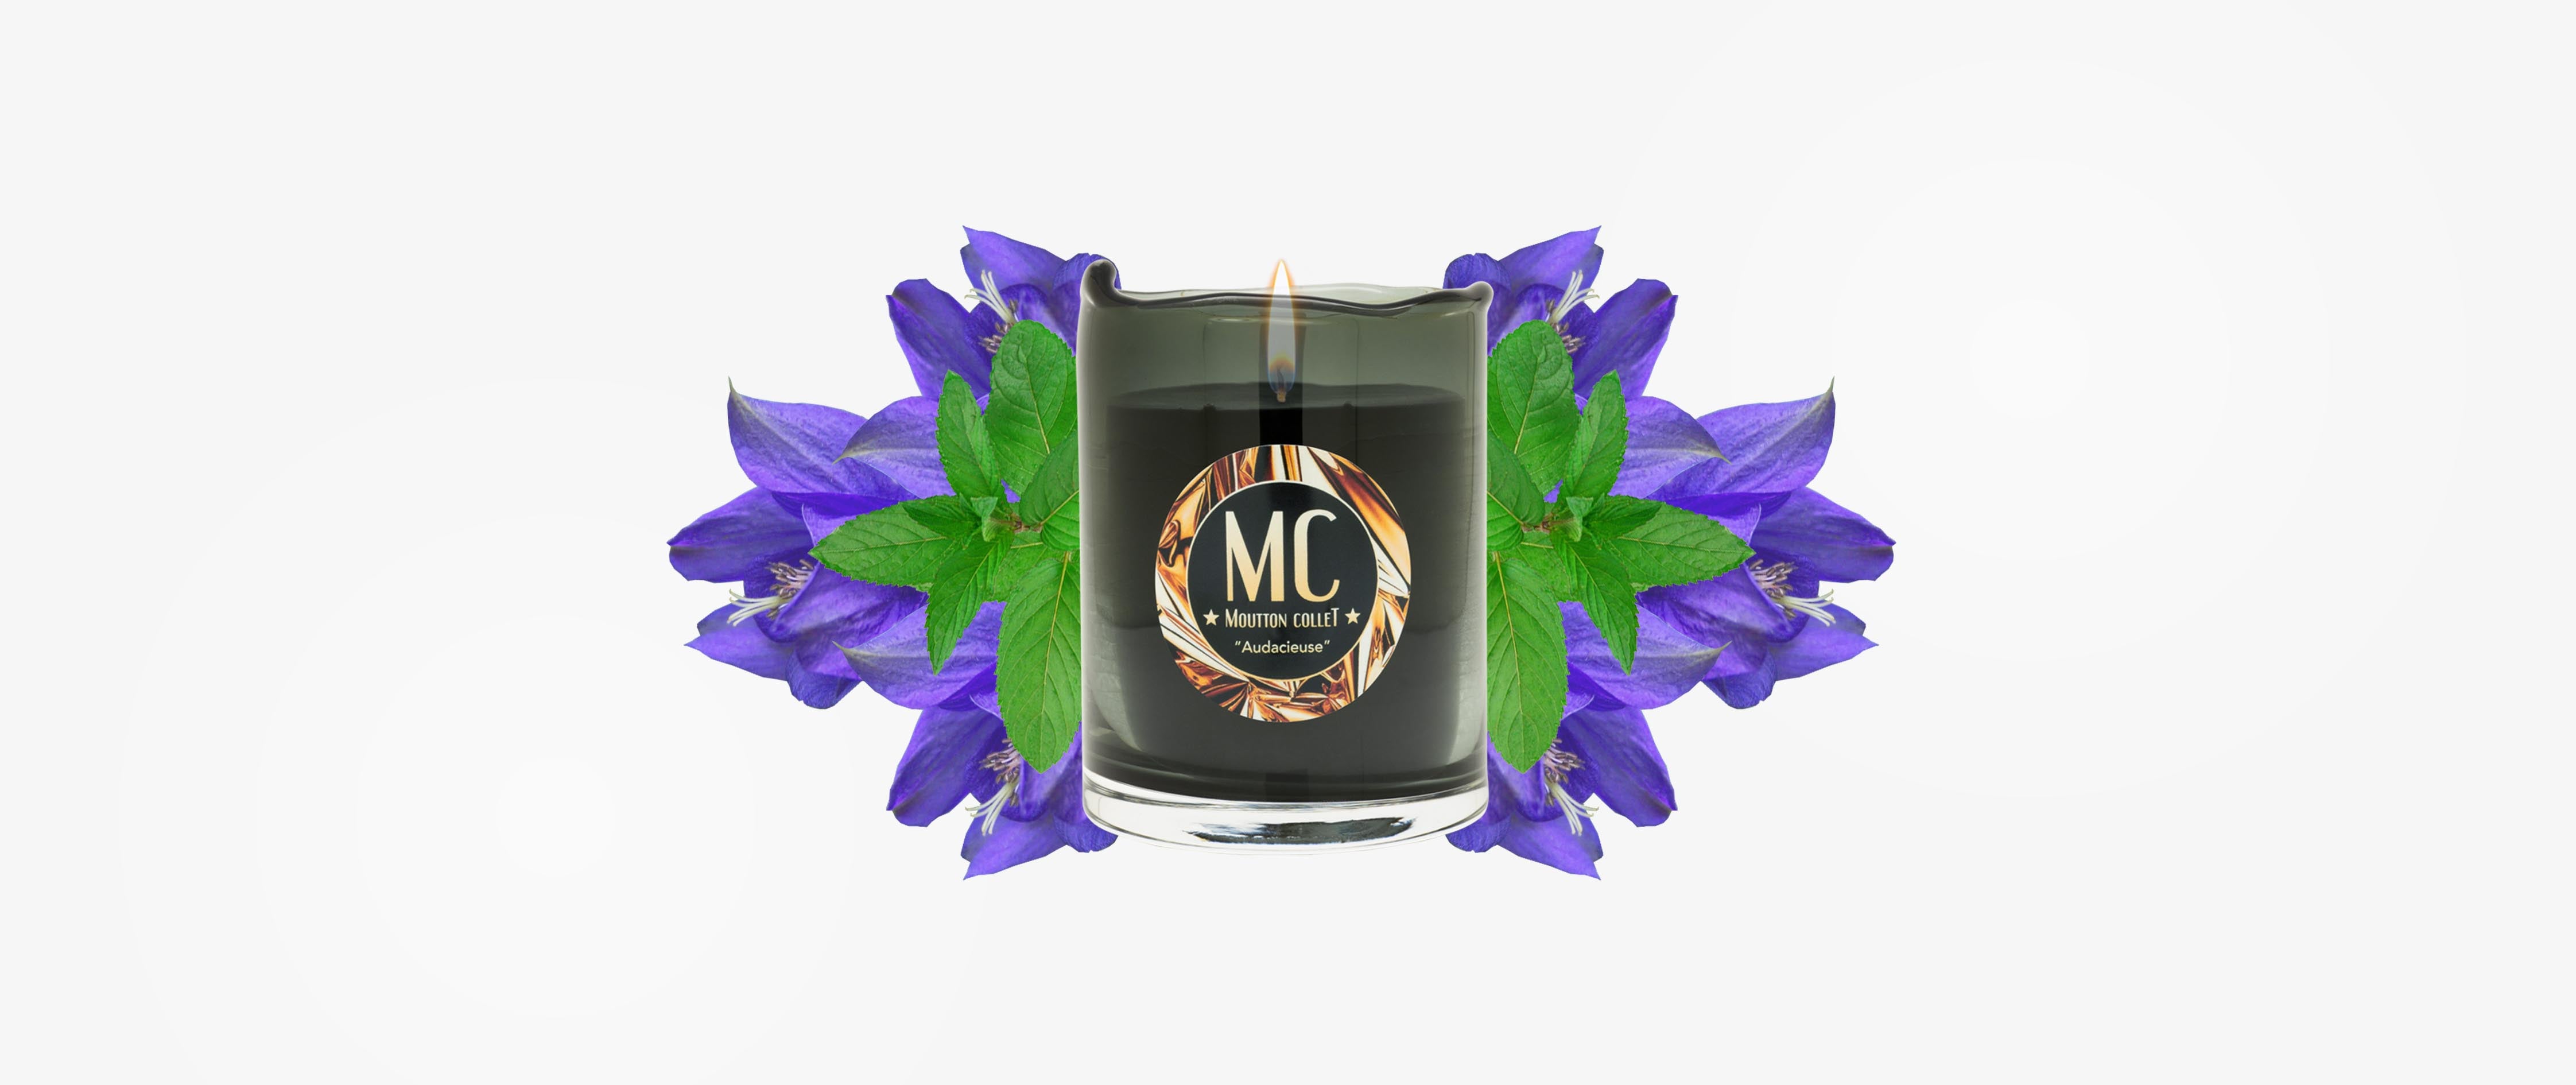 Scented Jewellery Candle "Audacieuse"